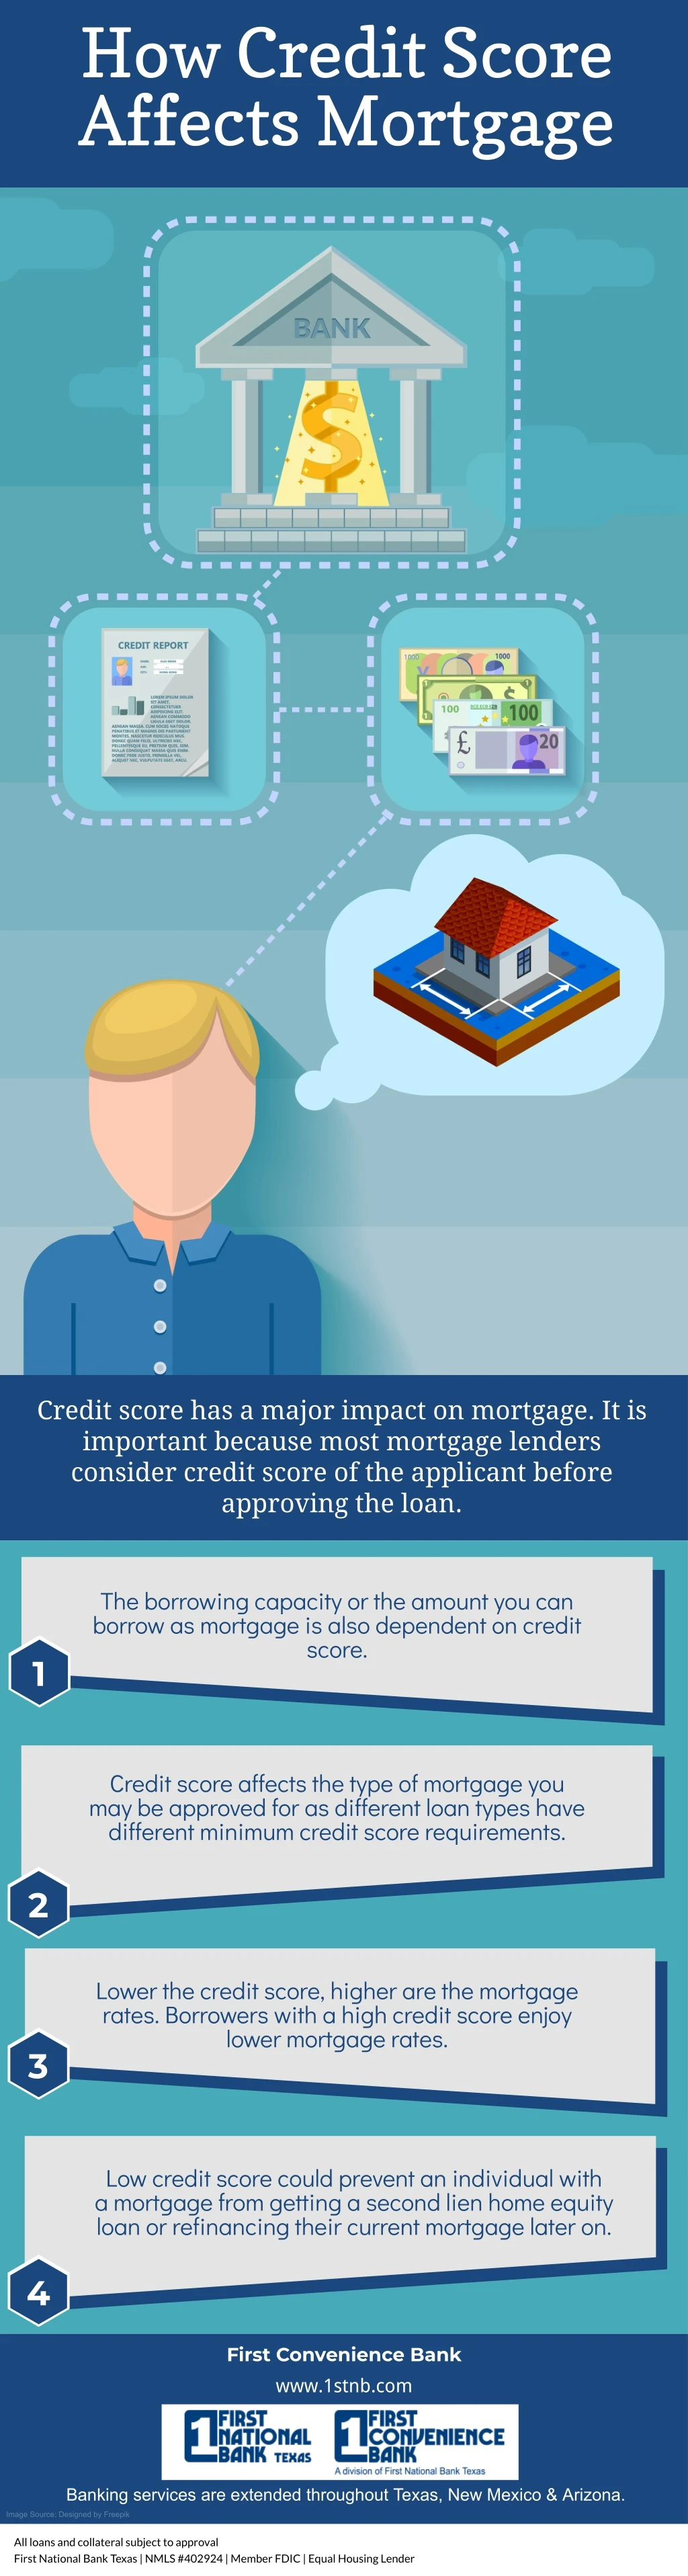 how credit score affects mortgage